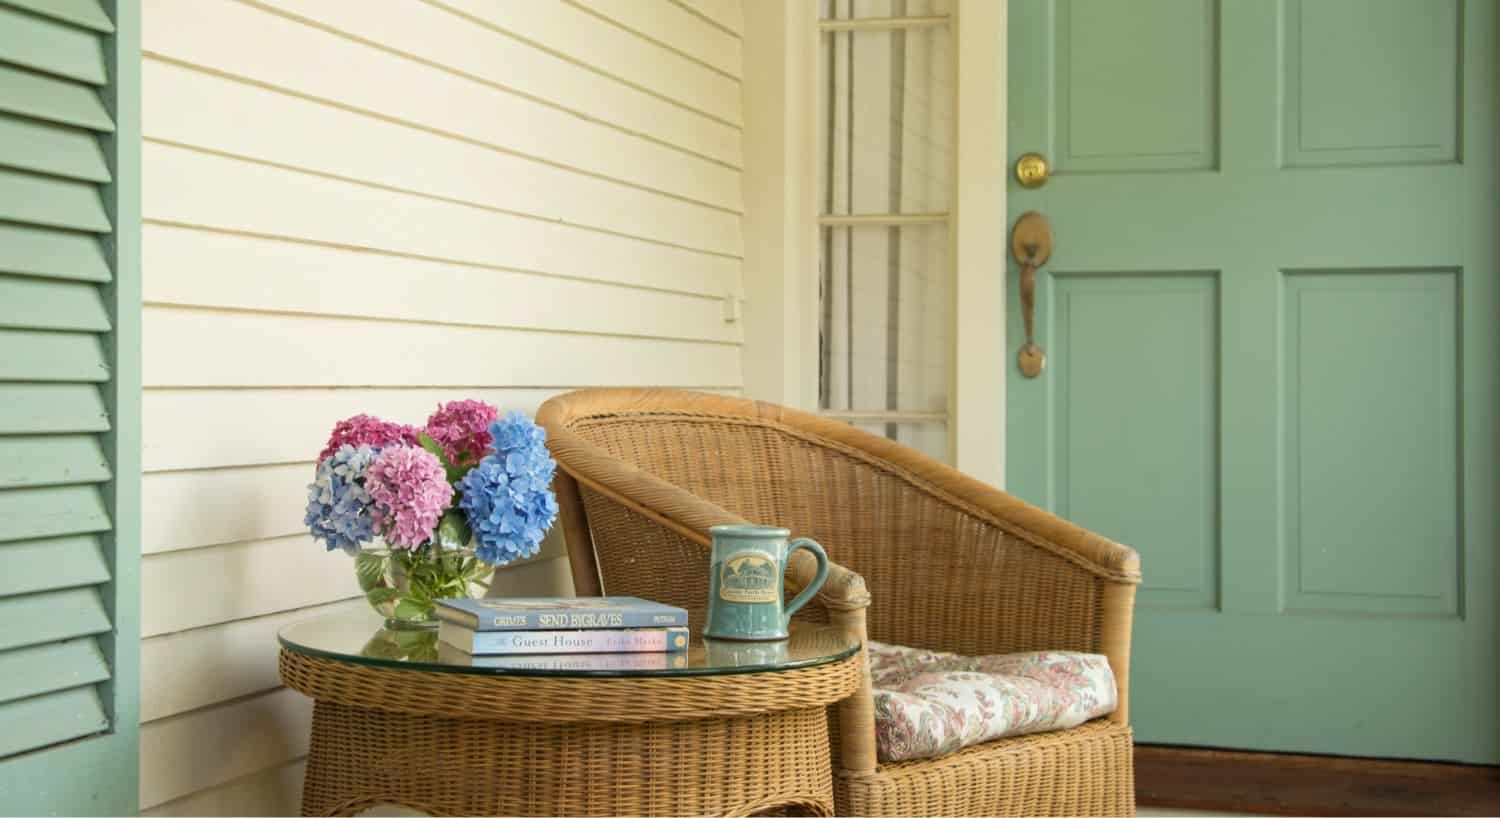 Light brown wicker chair with light paisley cushion next to light brown wicker coffee table with glass top with glass vase, pink and blue flowers, coffe mug, and books sitting on top